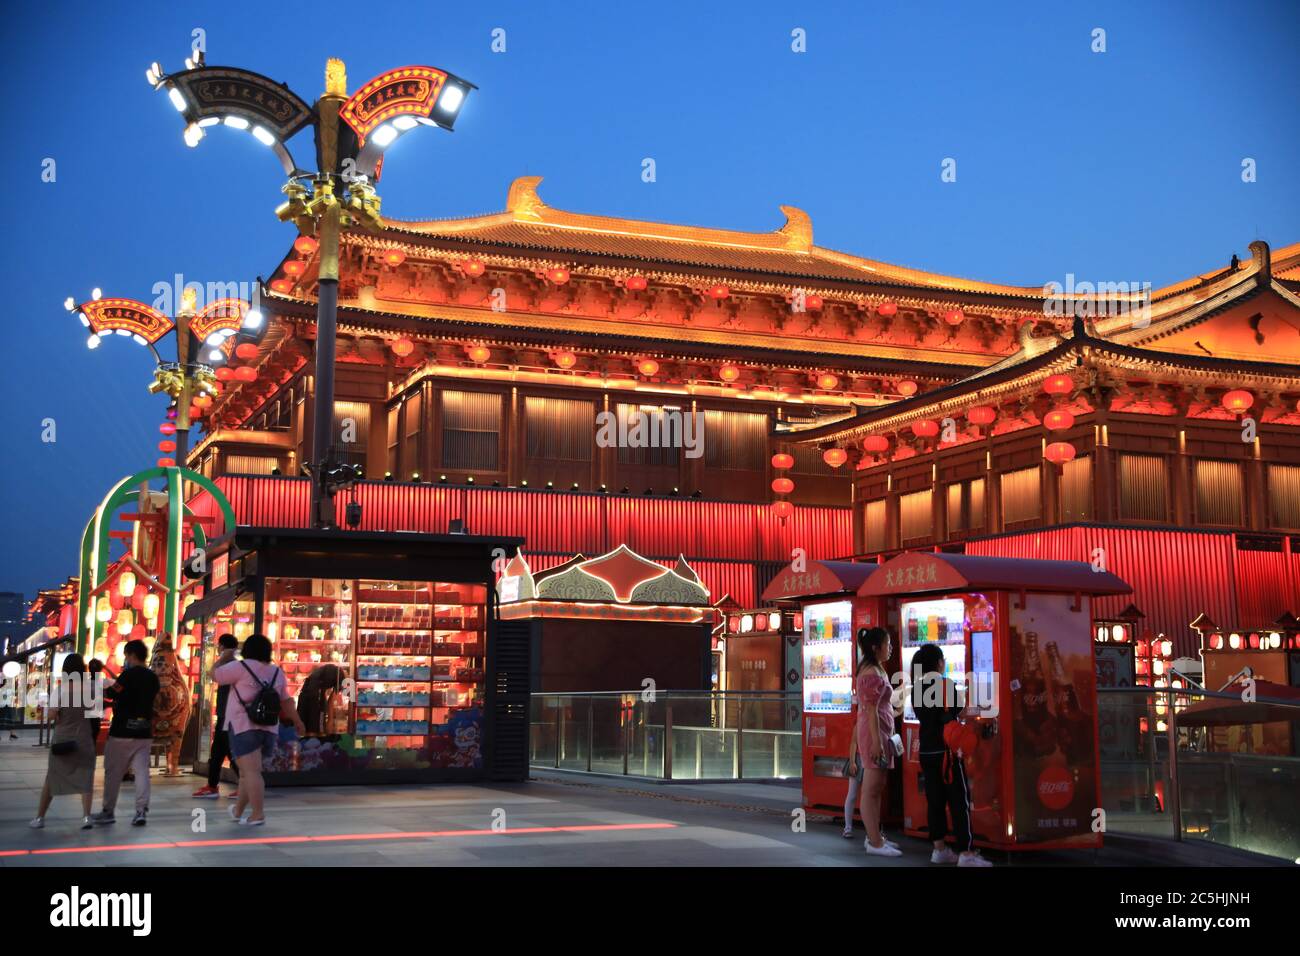 July 3, 2020, Xian, Xian, China: ShanxiÃ¯Â¼Å'CHINA-On July 2, 2020, datang Sleepless City in Xi 'an, Shaanxi province was illuminated and lively, attracting citizens and visitors to punch in. Datang city as a symbol of xi 'an ''night economy'', in the normalized epidemic prevention and control, pedestrian street of '''' daruma'' little sister '''' stone'' ''li bai'' and so on dozens of colorful performances, coupled with the unique tang culture lasting appeal and dreaming of light show, let datang unripe brightness, in the city that never sleeps night fire xian ''night of the economy' (Credit Stock Photo